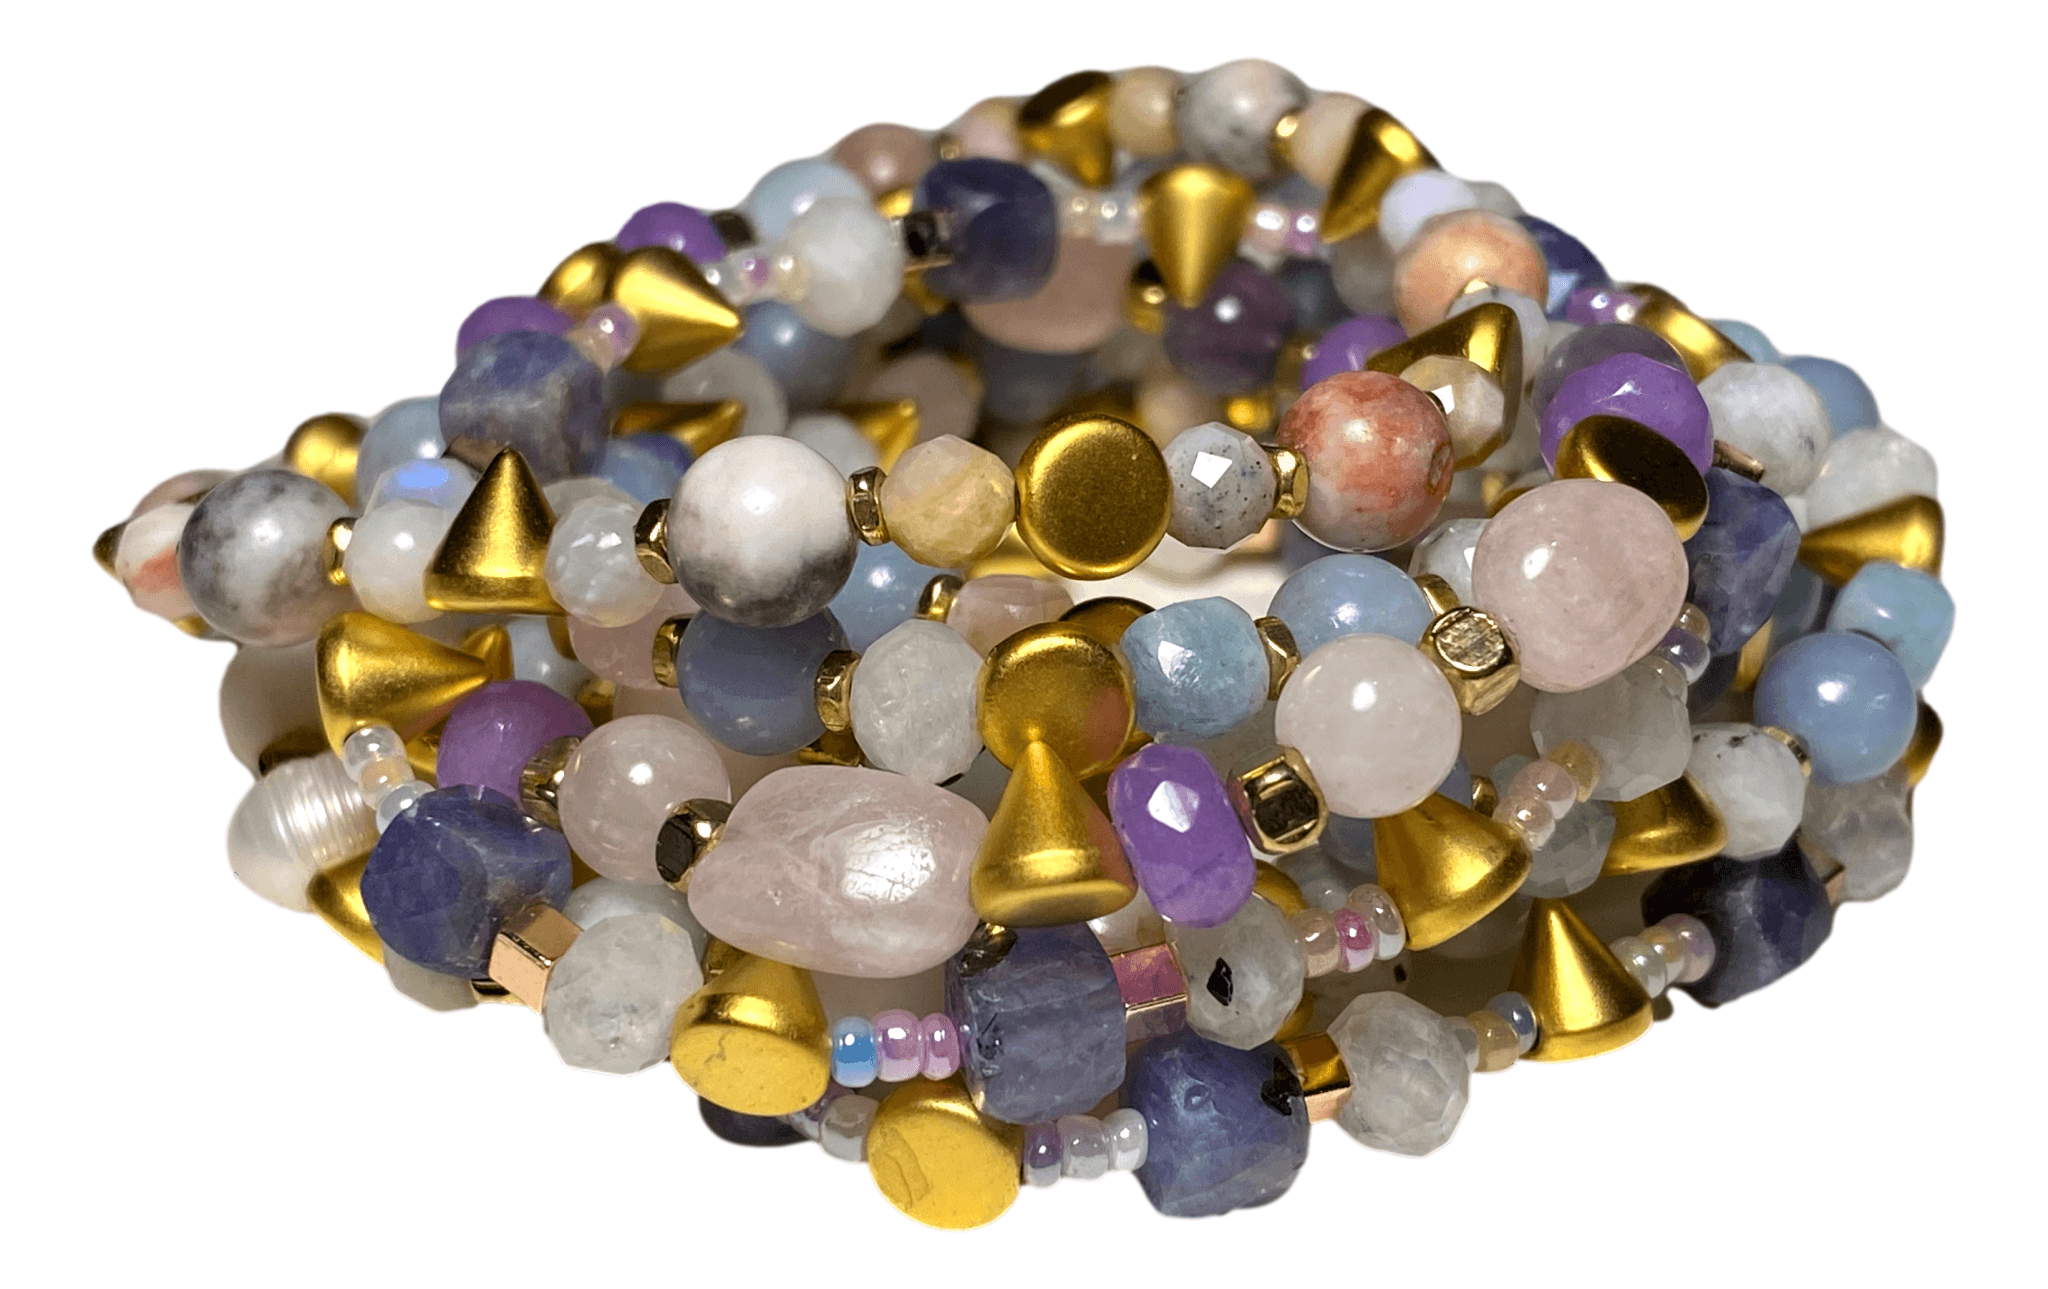 Bracelet Stretch Small Beads Heart Crown Accent Beads Semi-Precious Stones from Ysleta Mission Gift Shop A